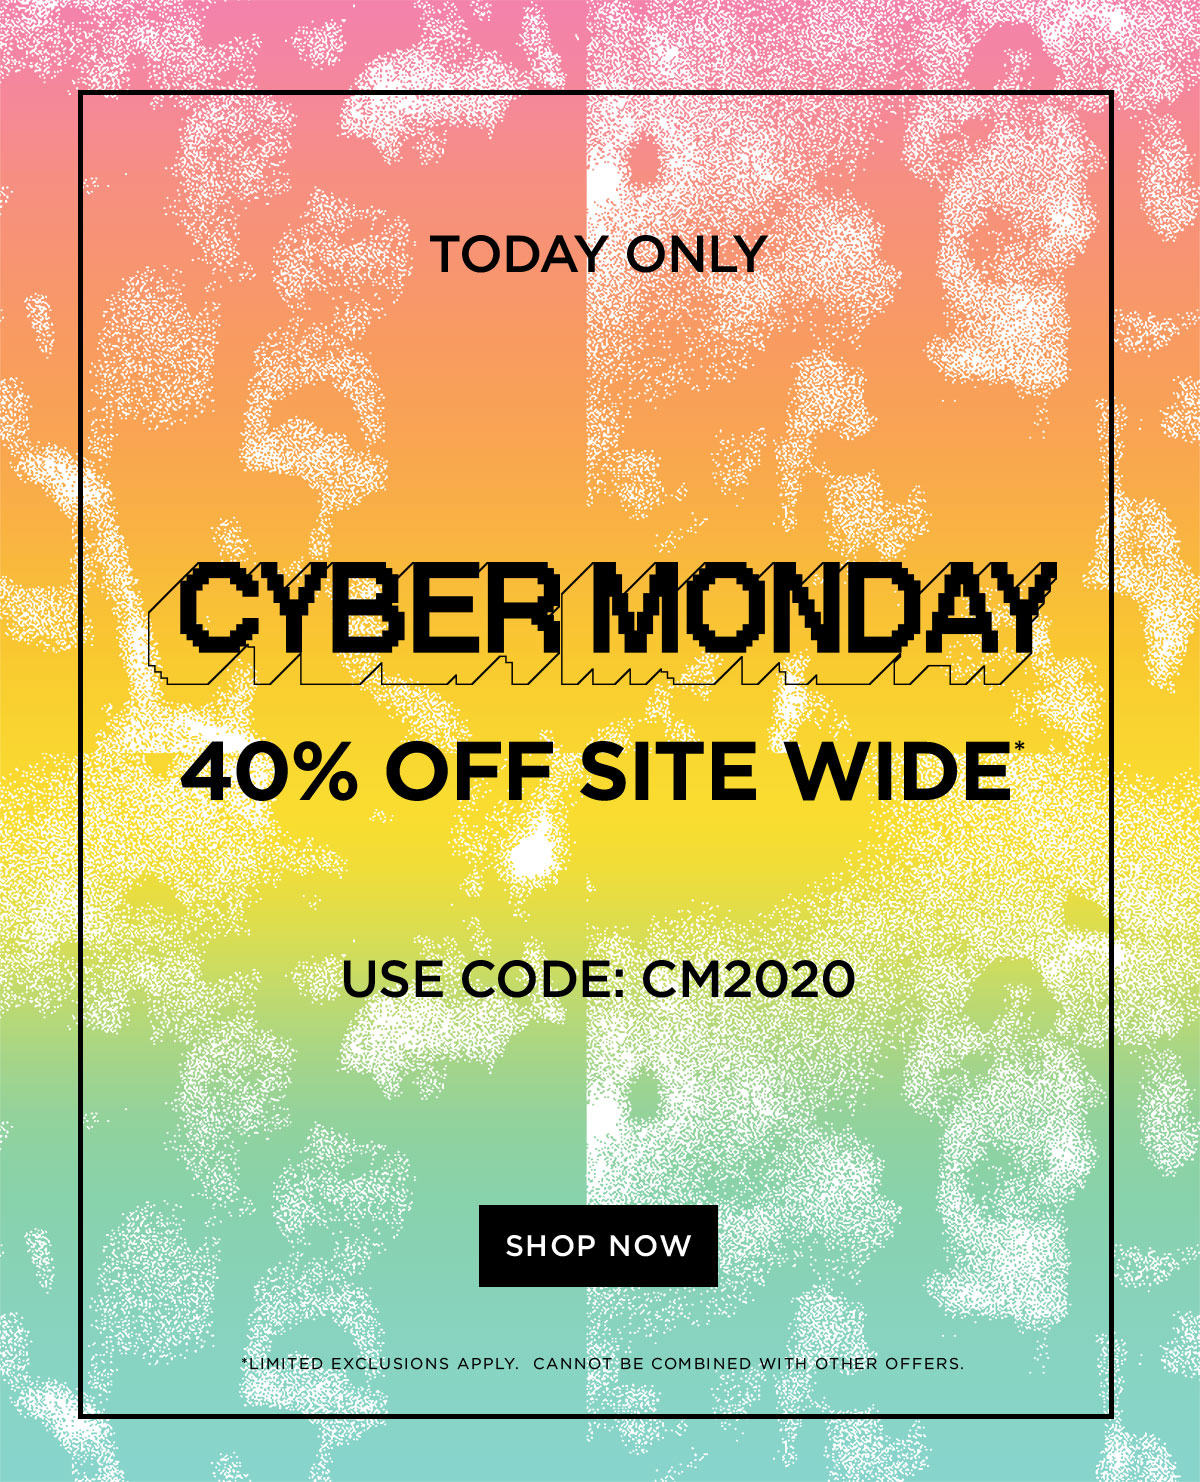 Today Only! Cyber Monday: 40% Off Site Wide | Use Code CM2020 | Shop Now | Limited exclusions apply. Cannot be combined with other offers.